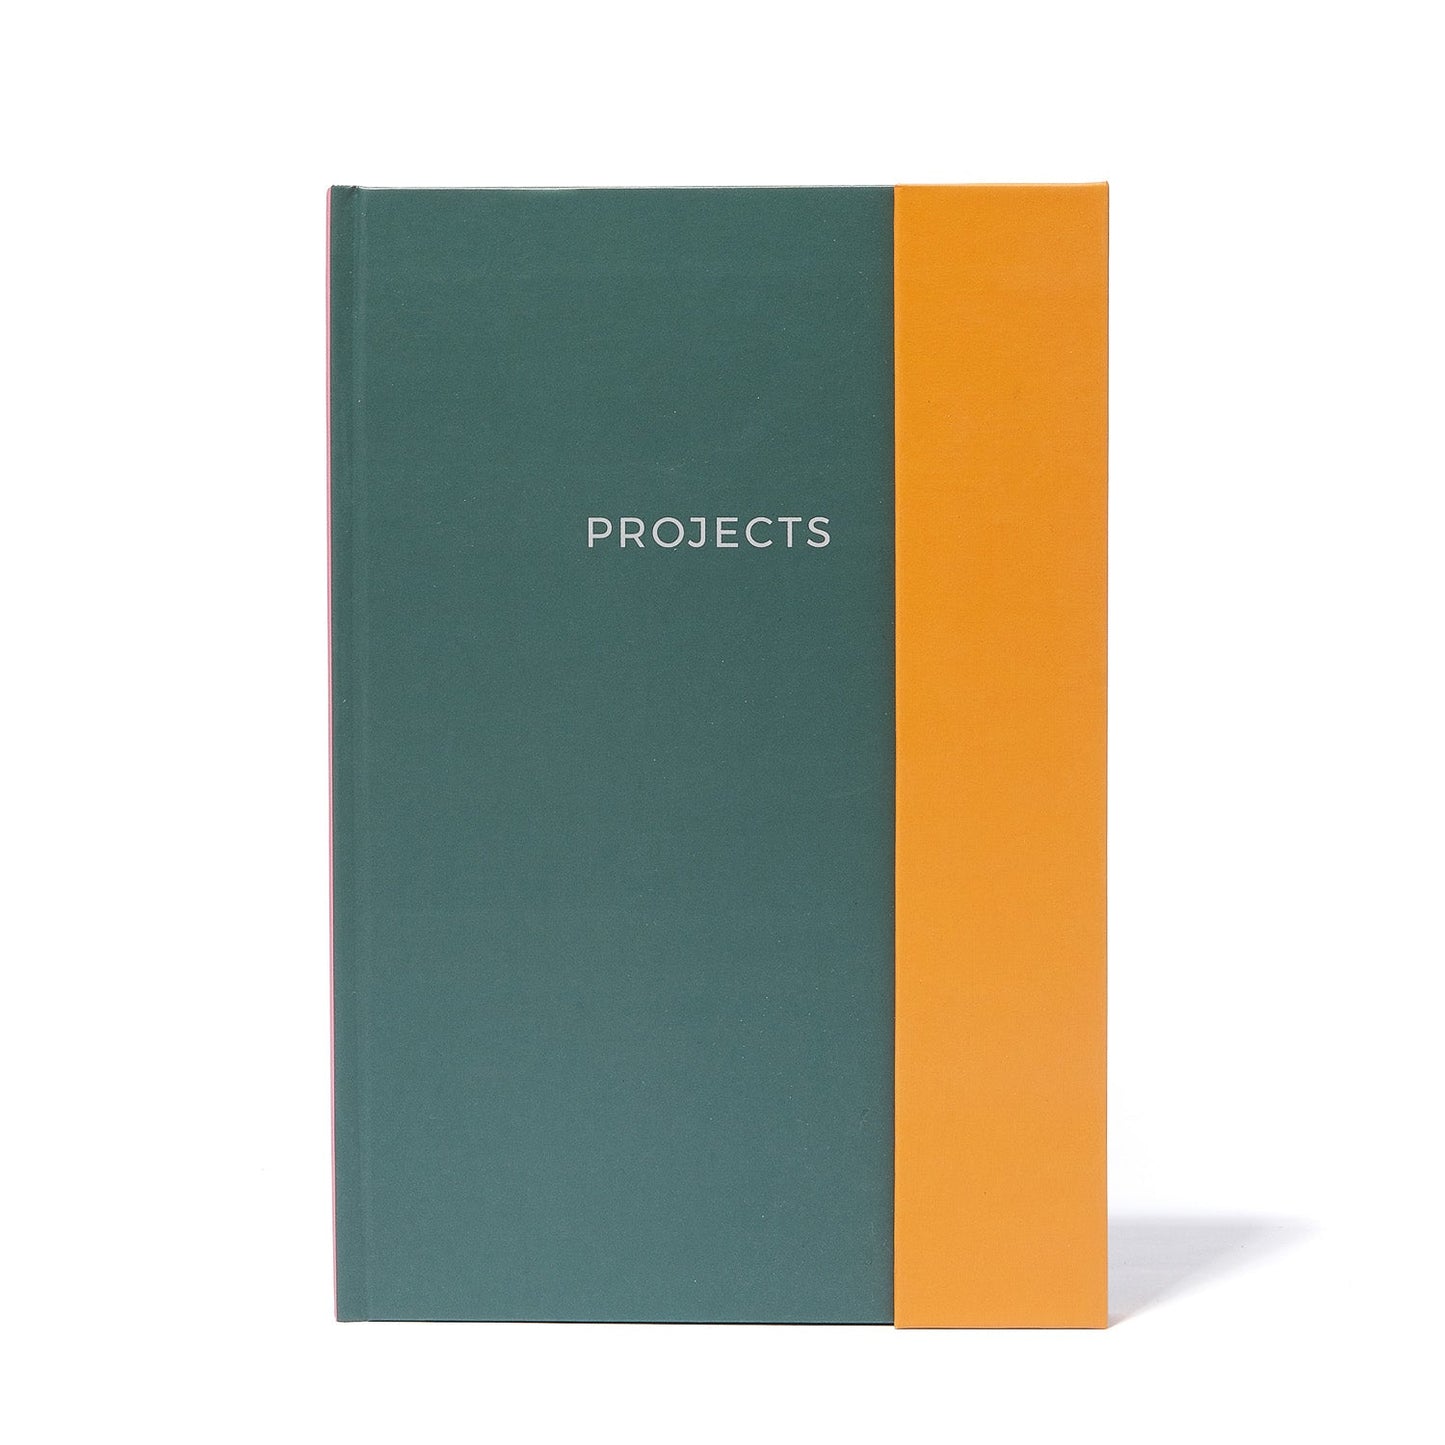 STICKY TAB A5 NOTEBOOK | PROJECTS